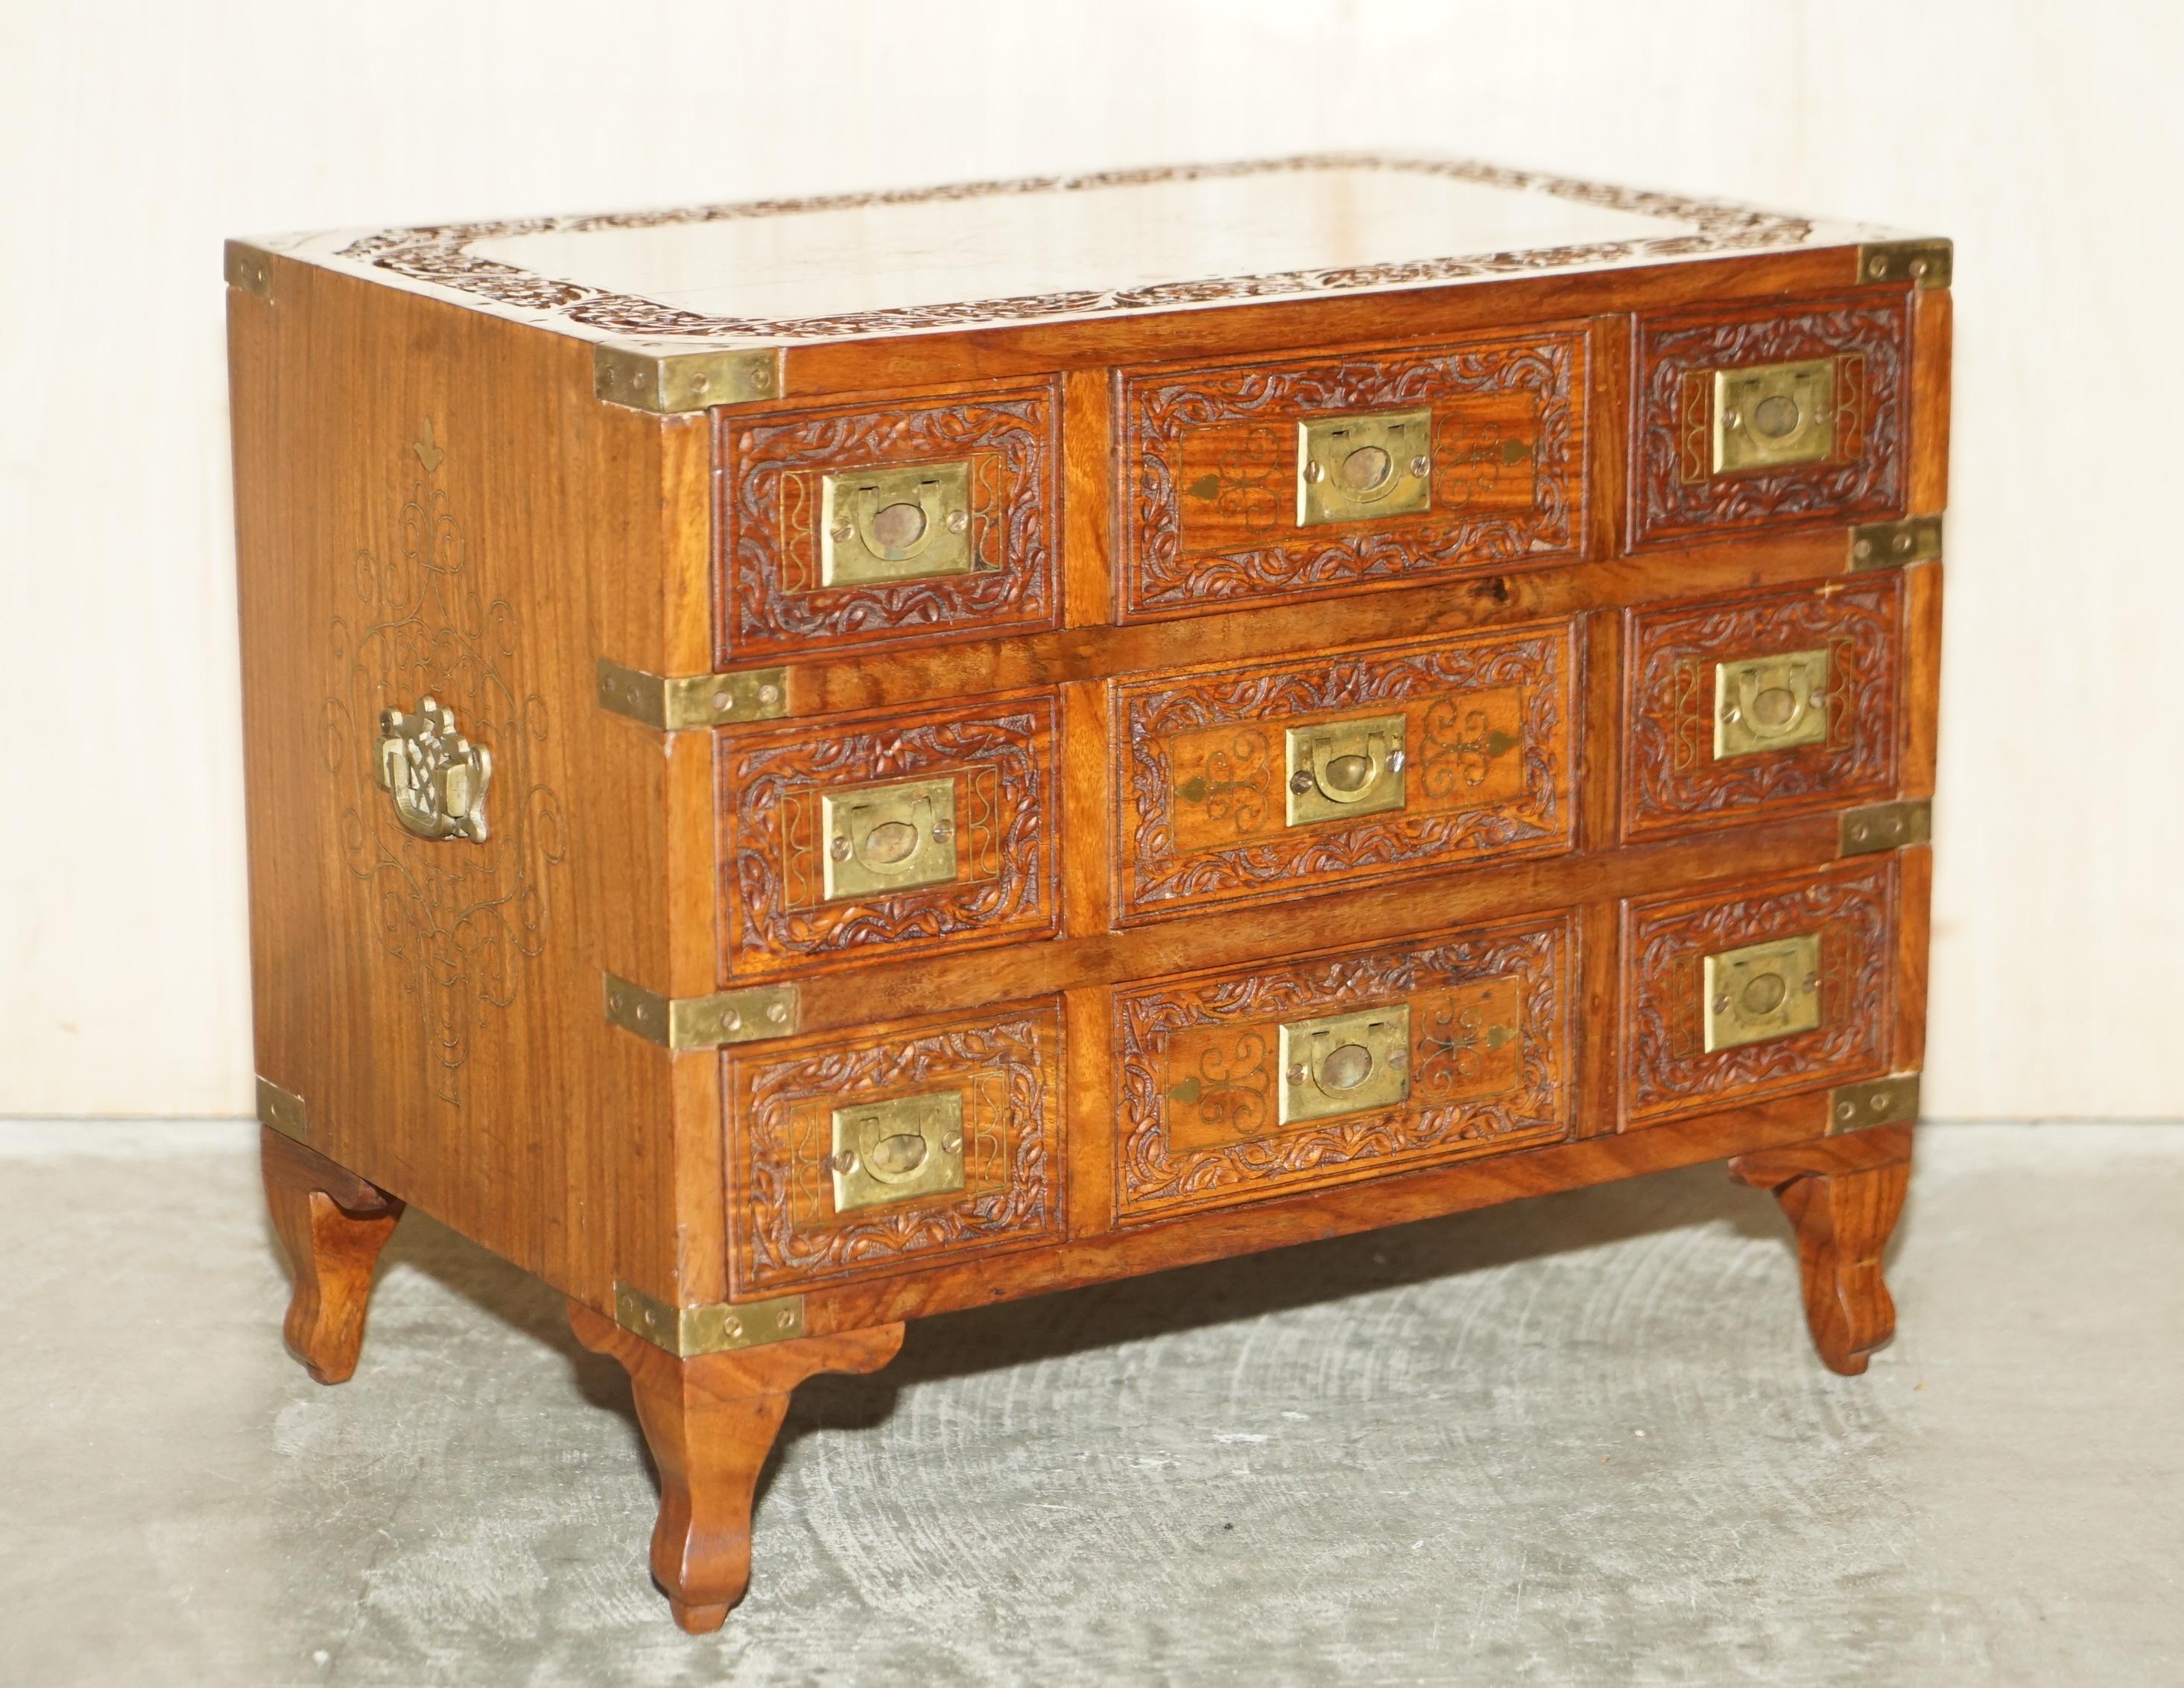 We are delighted to offer for sale this stunning original Anglo Indian Brass and Rosewood Circa 1880-1900 small side table tea chest of drawers or large table top jewellery cabinet

A good looking and well made piece, most likely designed to hold